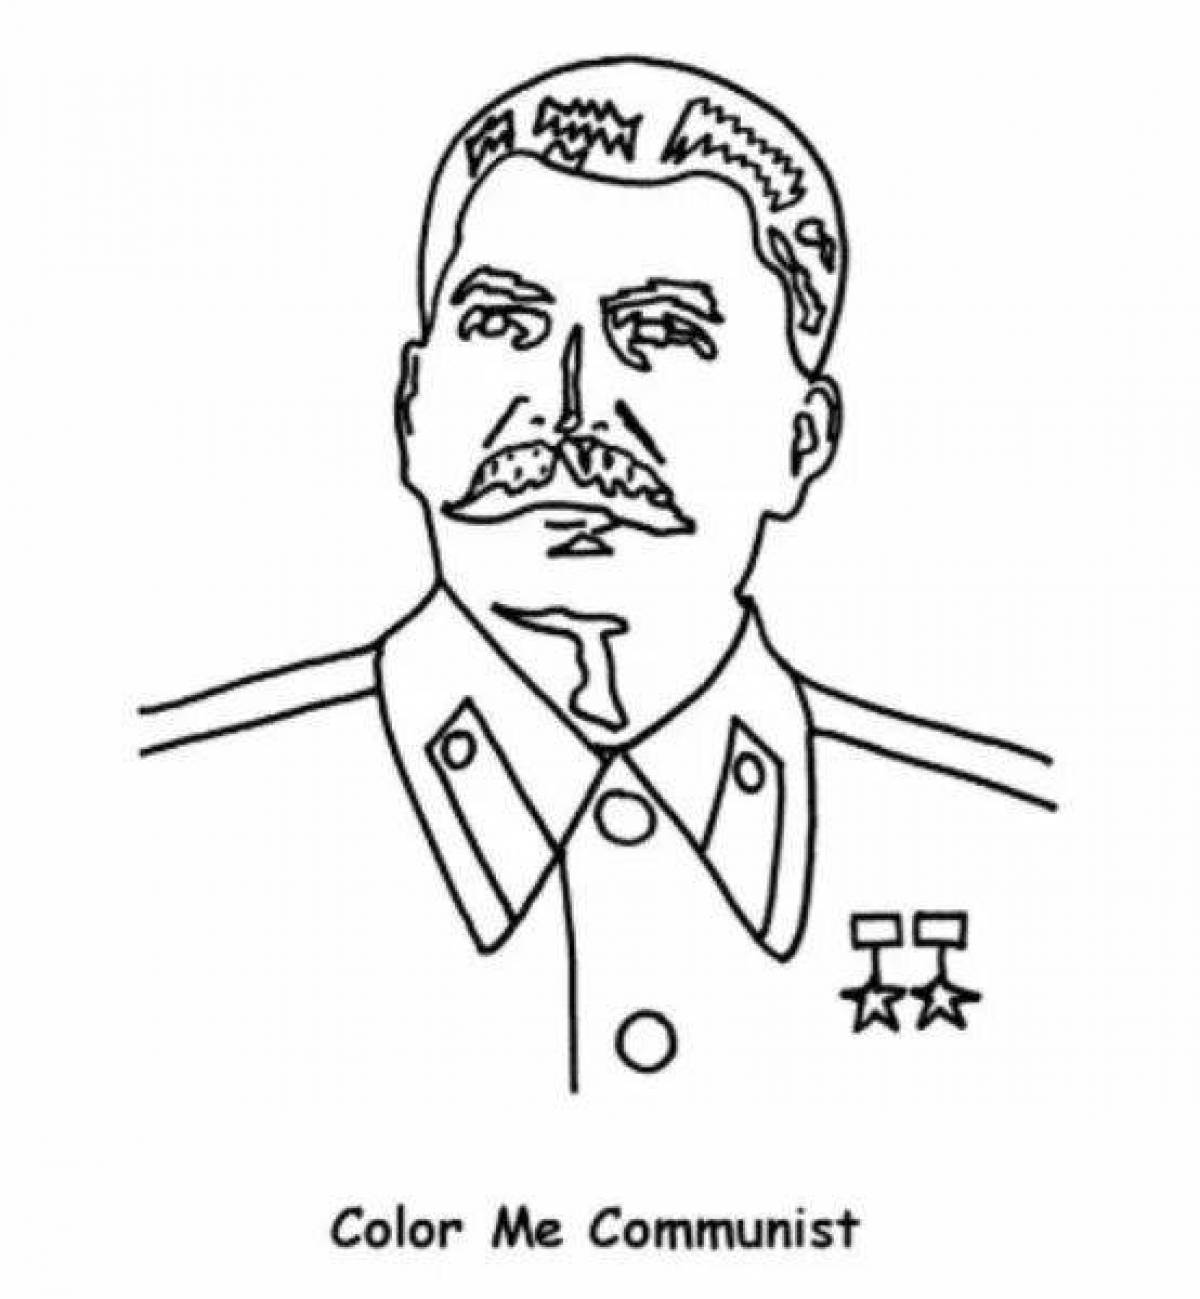 Interesting coloring of stalin